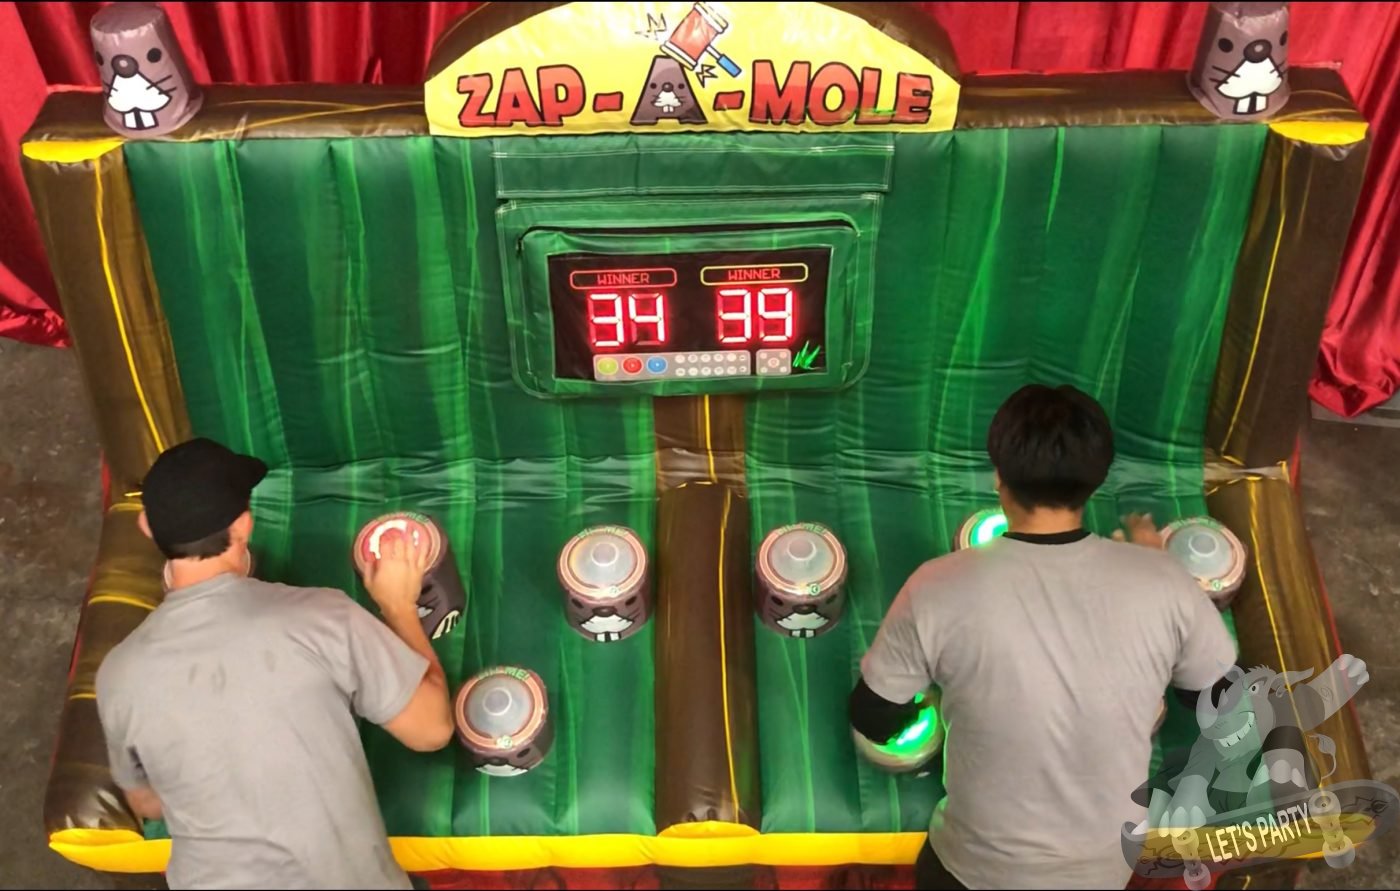 Playing the Whac-a-Mole game